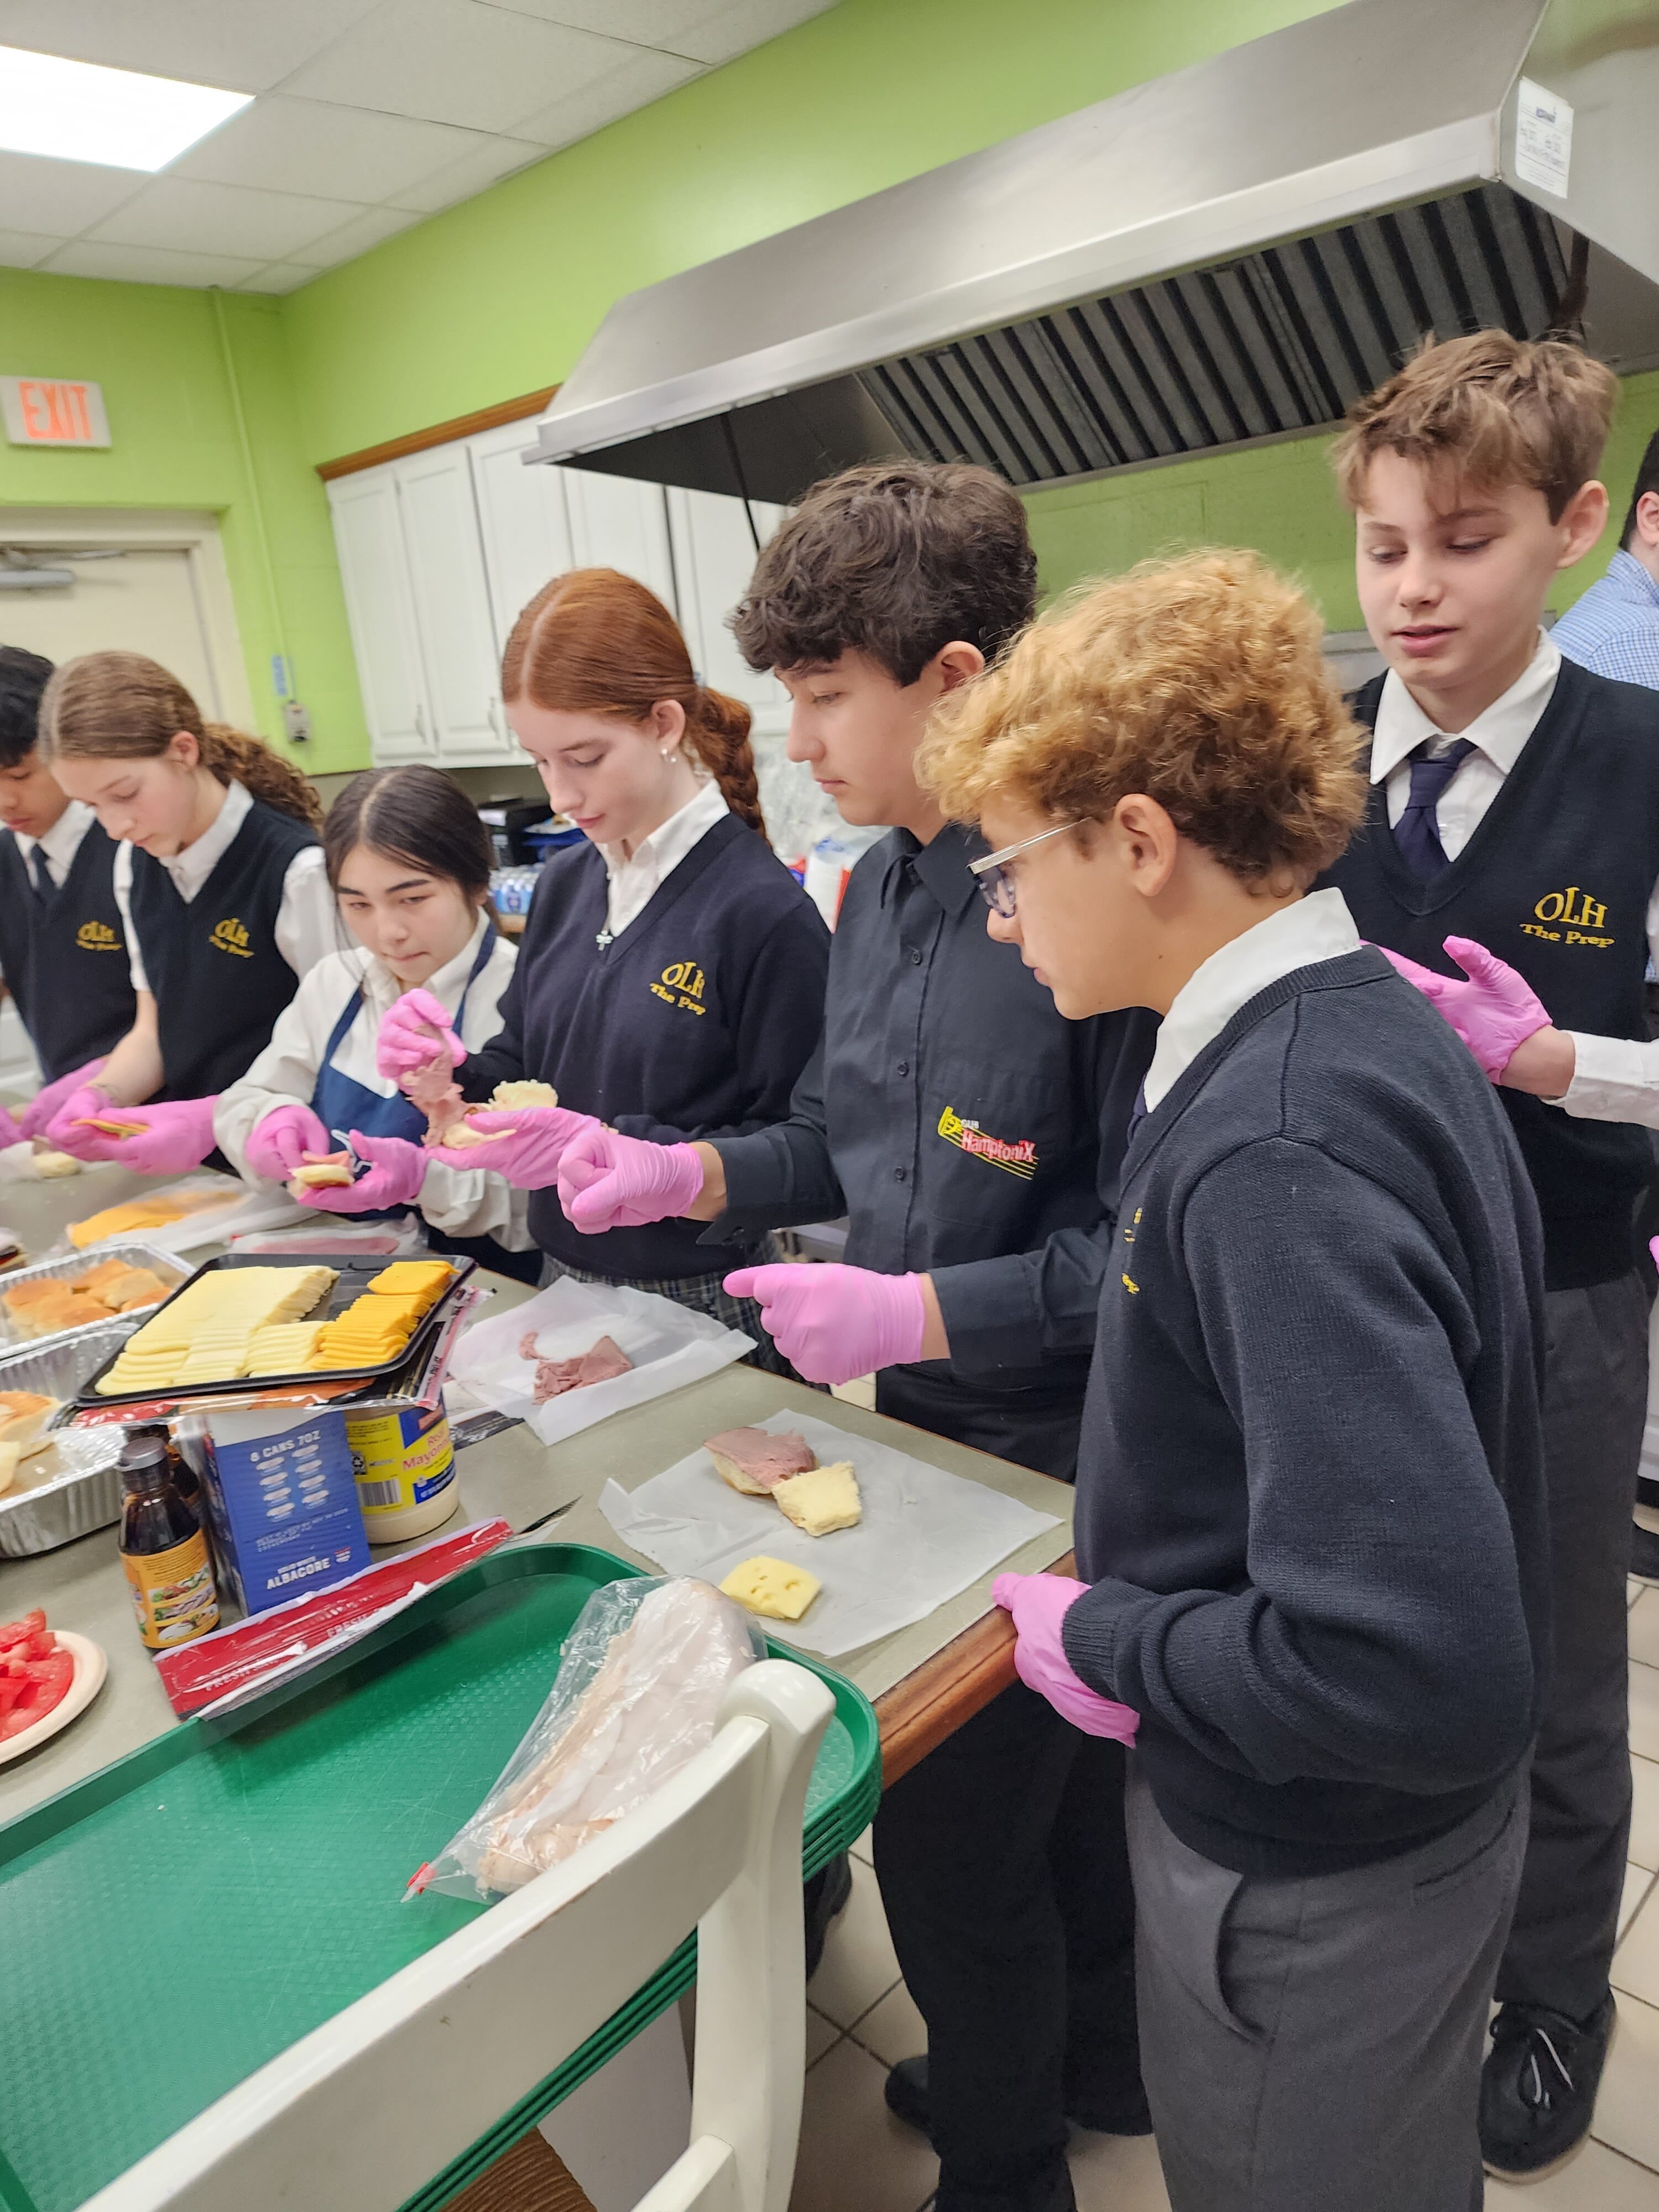 Our Lady of the Hamptons School Prep 8 students made and served the lunch for Senior Citizens Day. COURTESY OUR LADY OF THE HAMPTONS SCHOOL